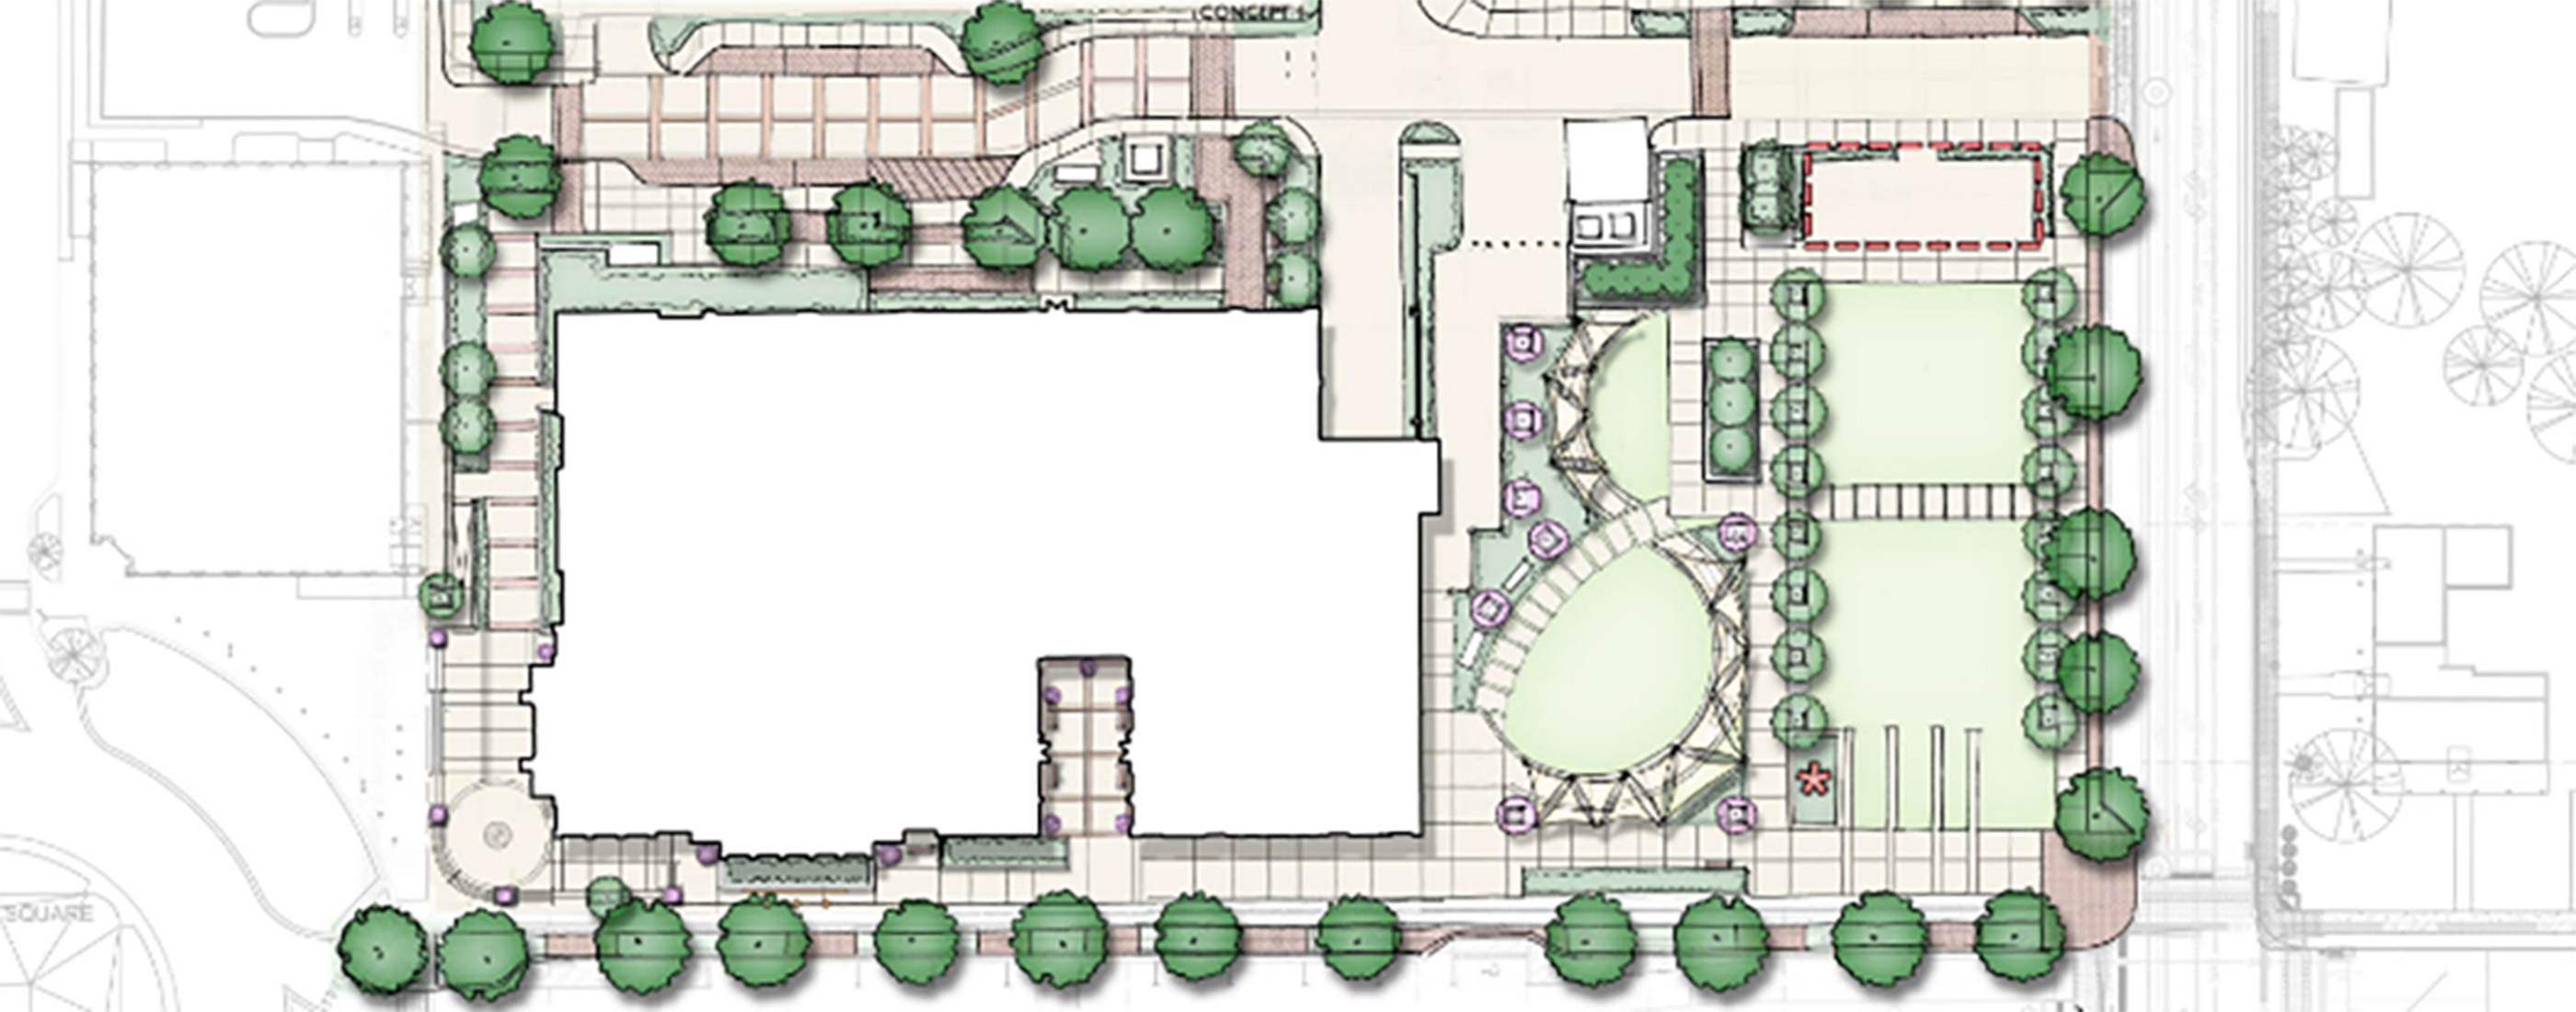 Site plan of the new city hall in Franklin, Tennessee.